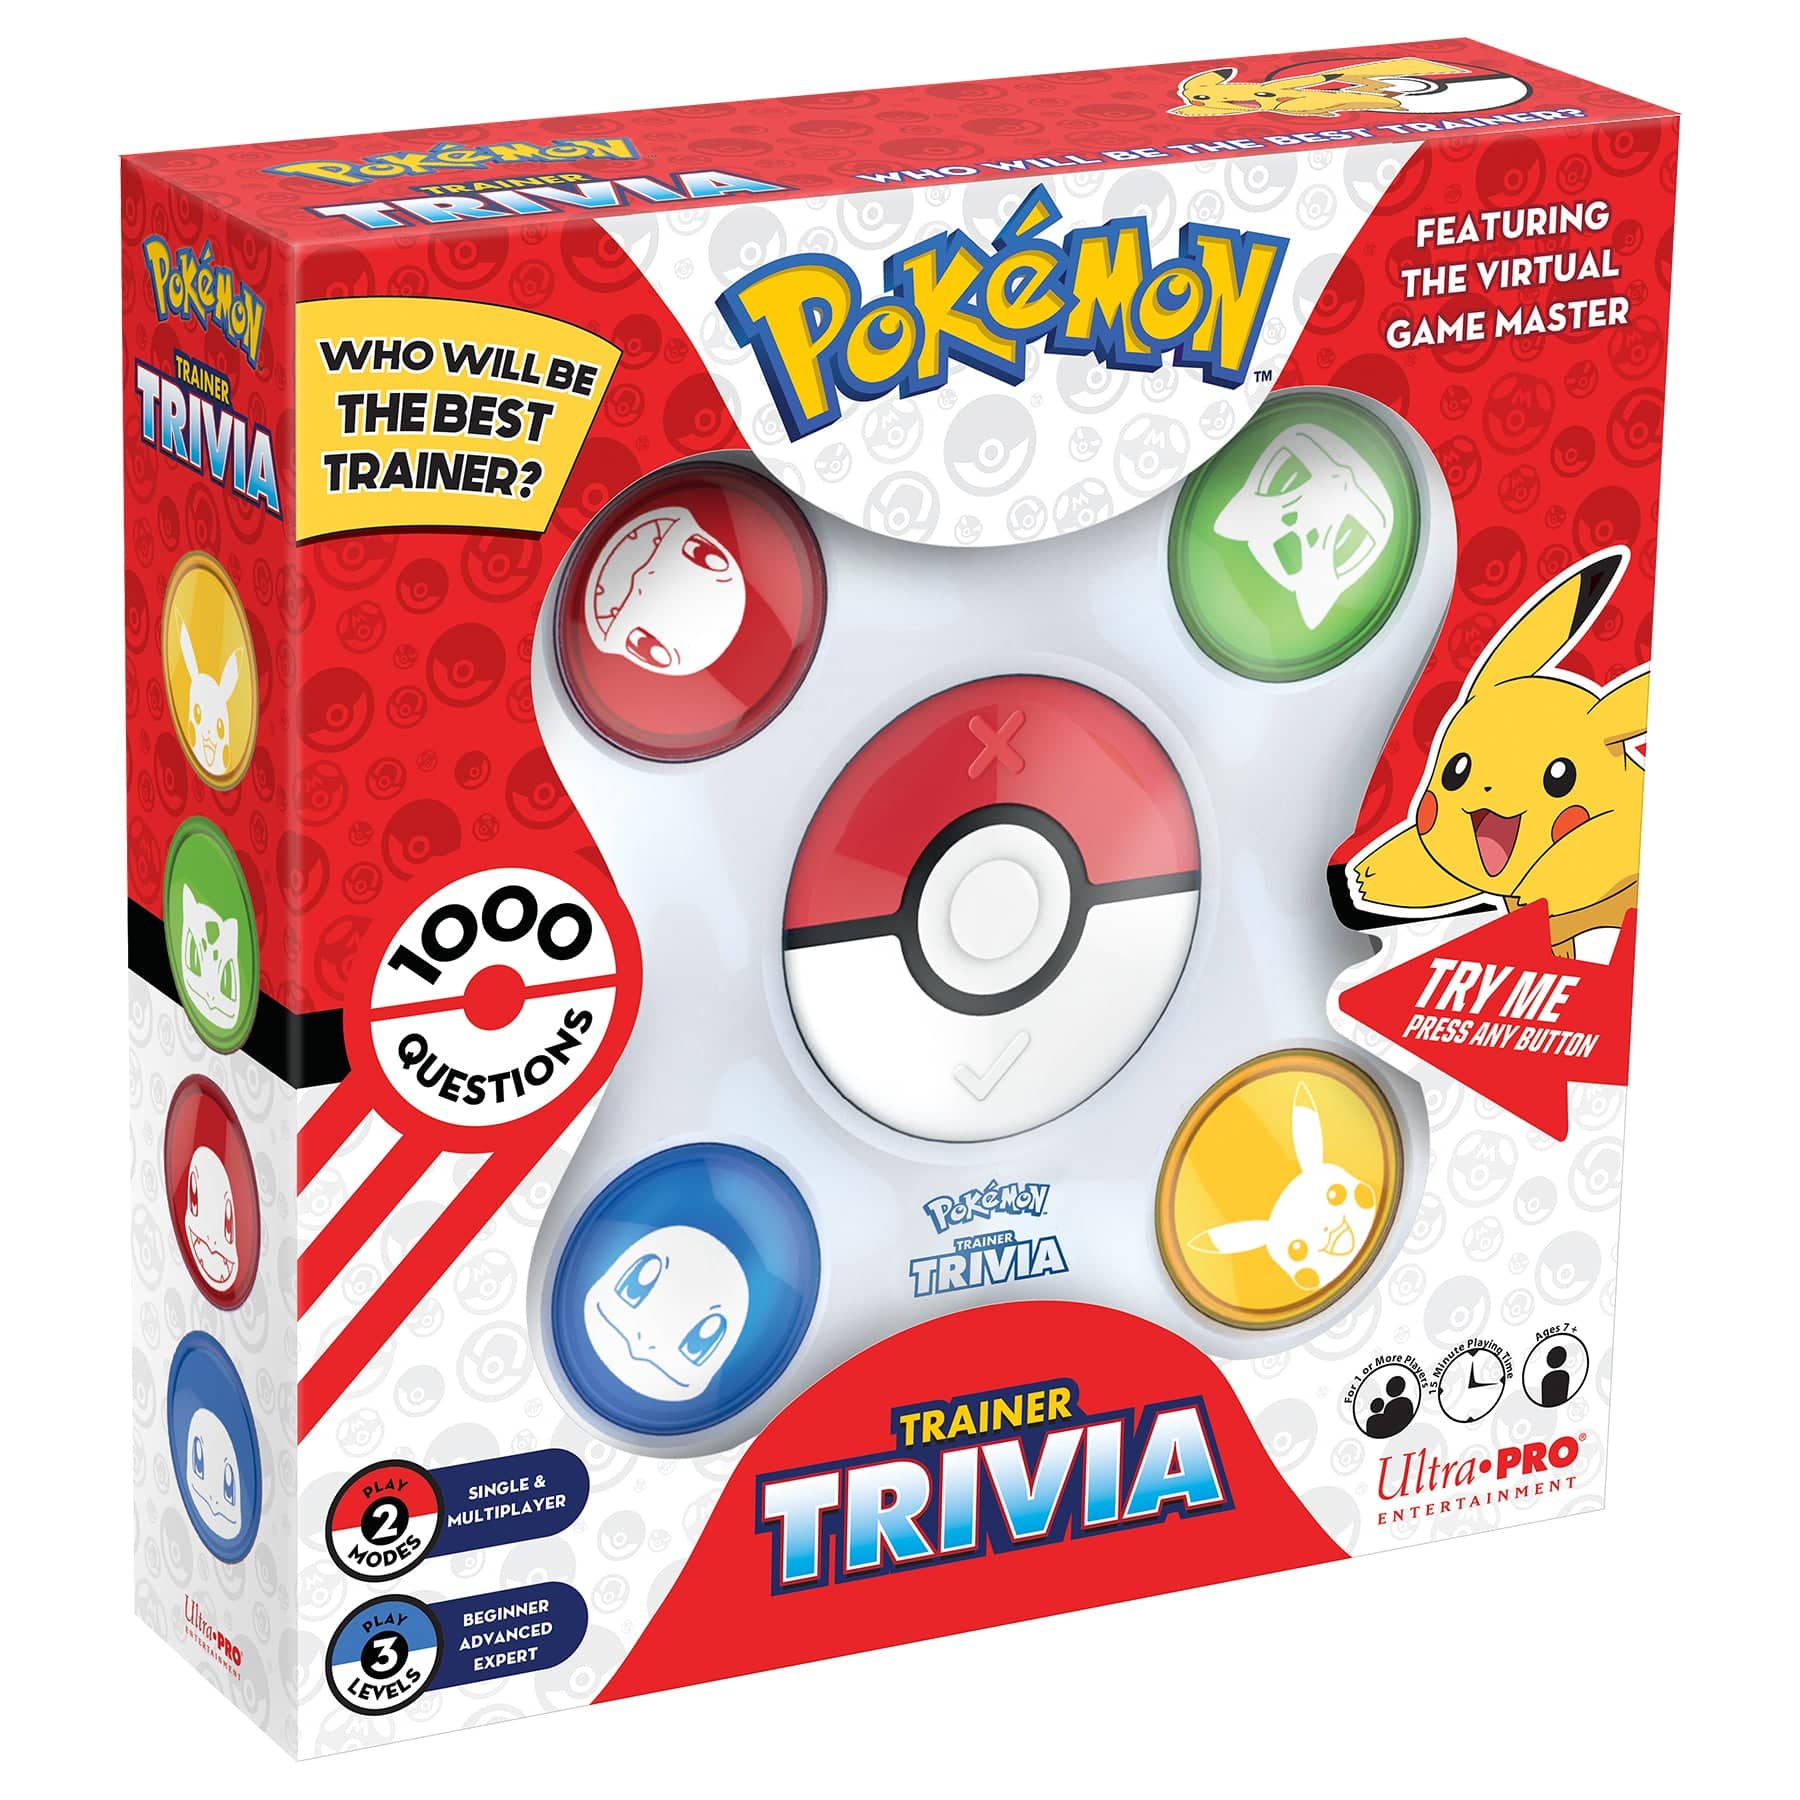 Pokémon Trainer Trivia | An Electronic Game for Ages 7 and up | Ultra PRO Entertainment